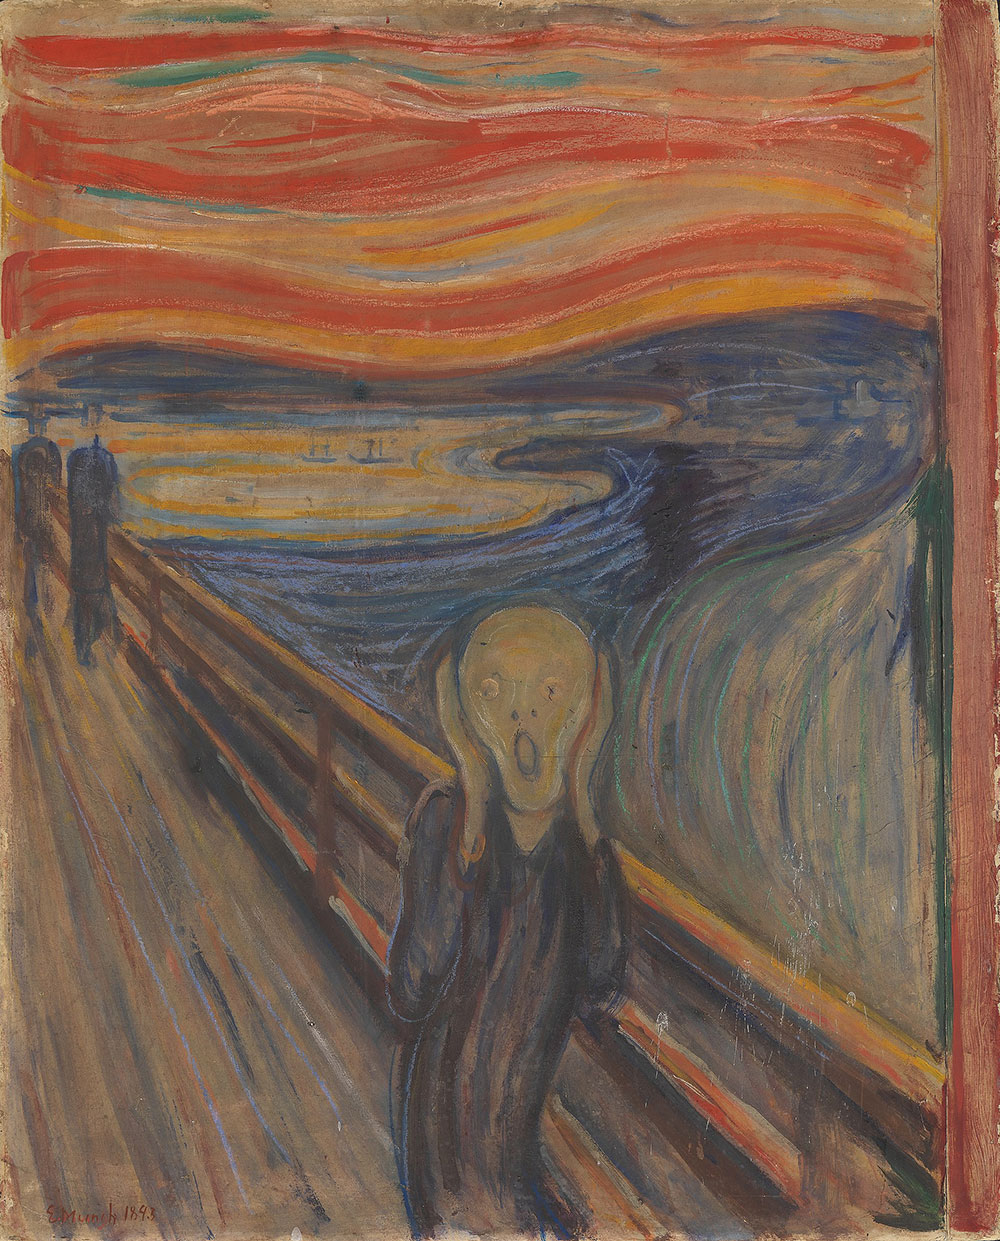 I'm Sure You Can't Match 14 of Paintings to the Artist Quiz The Scream painting by Edvard Munch